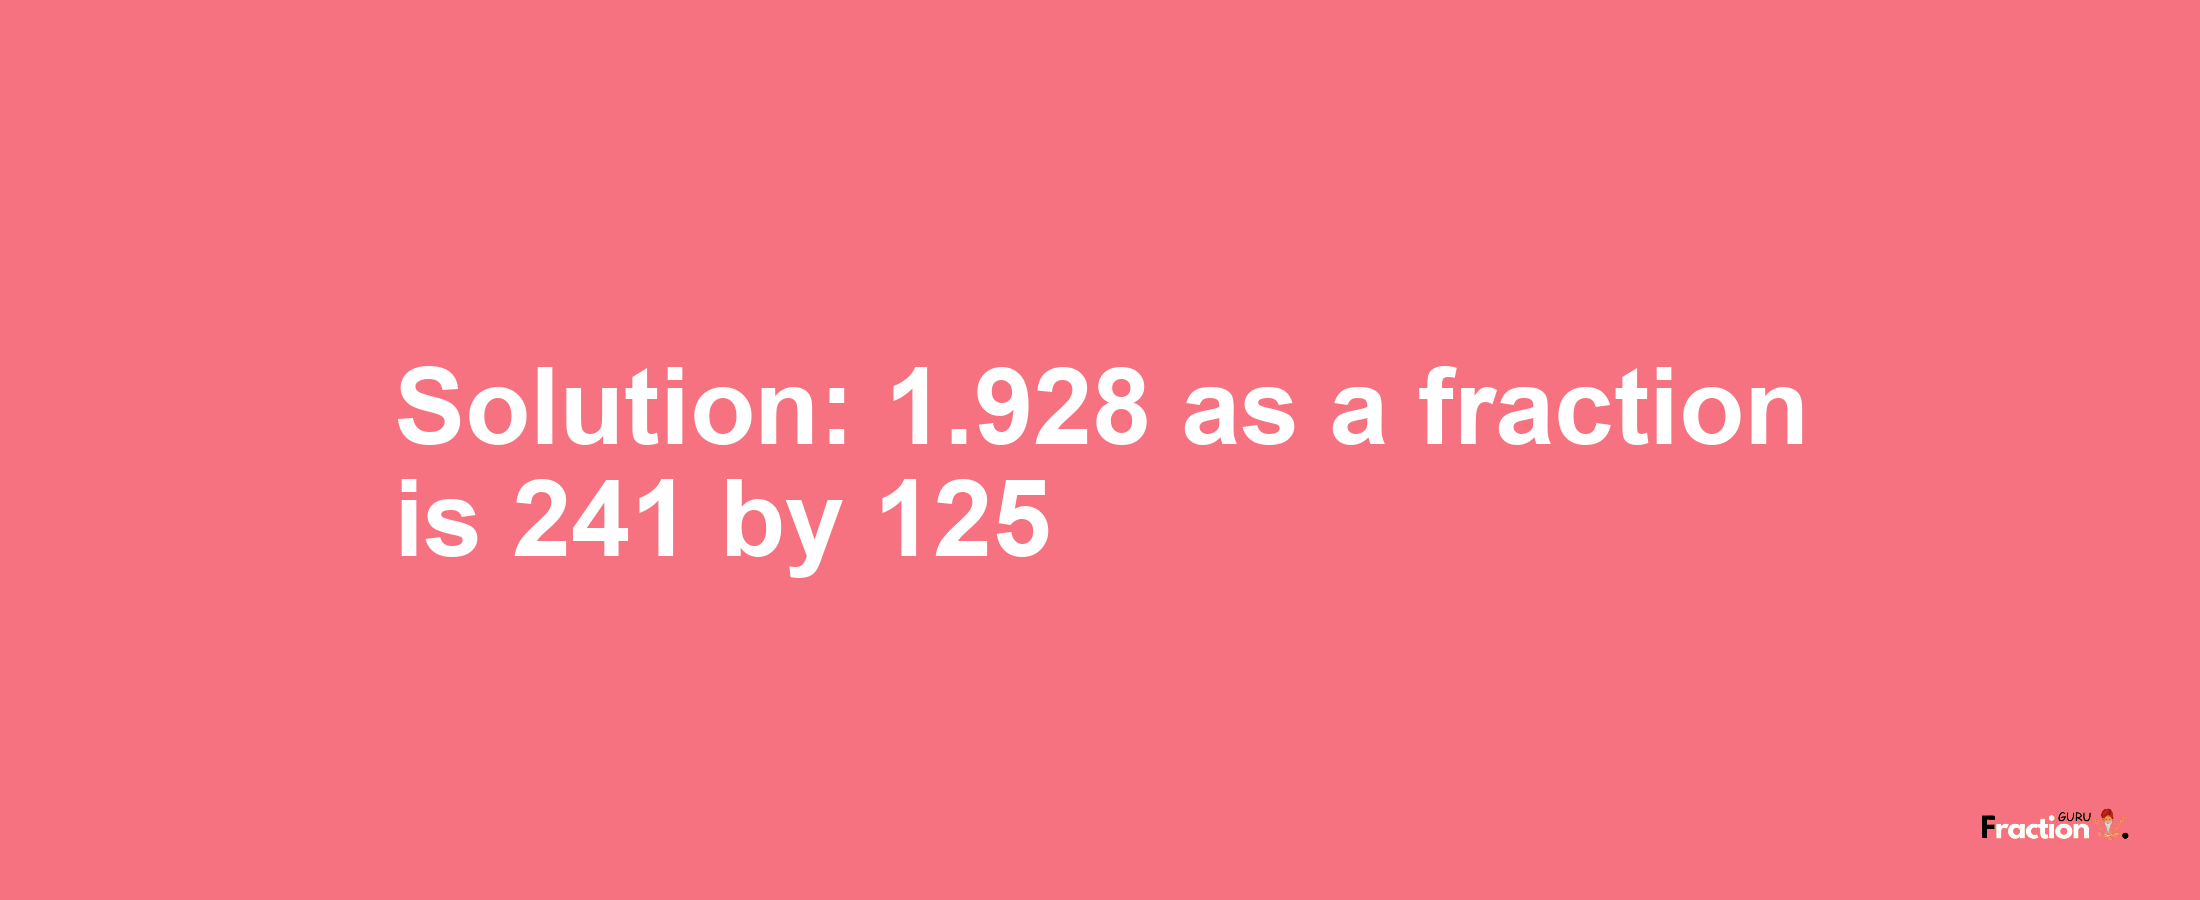 Solution:1.928 as a fraction is 241/125